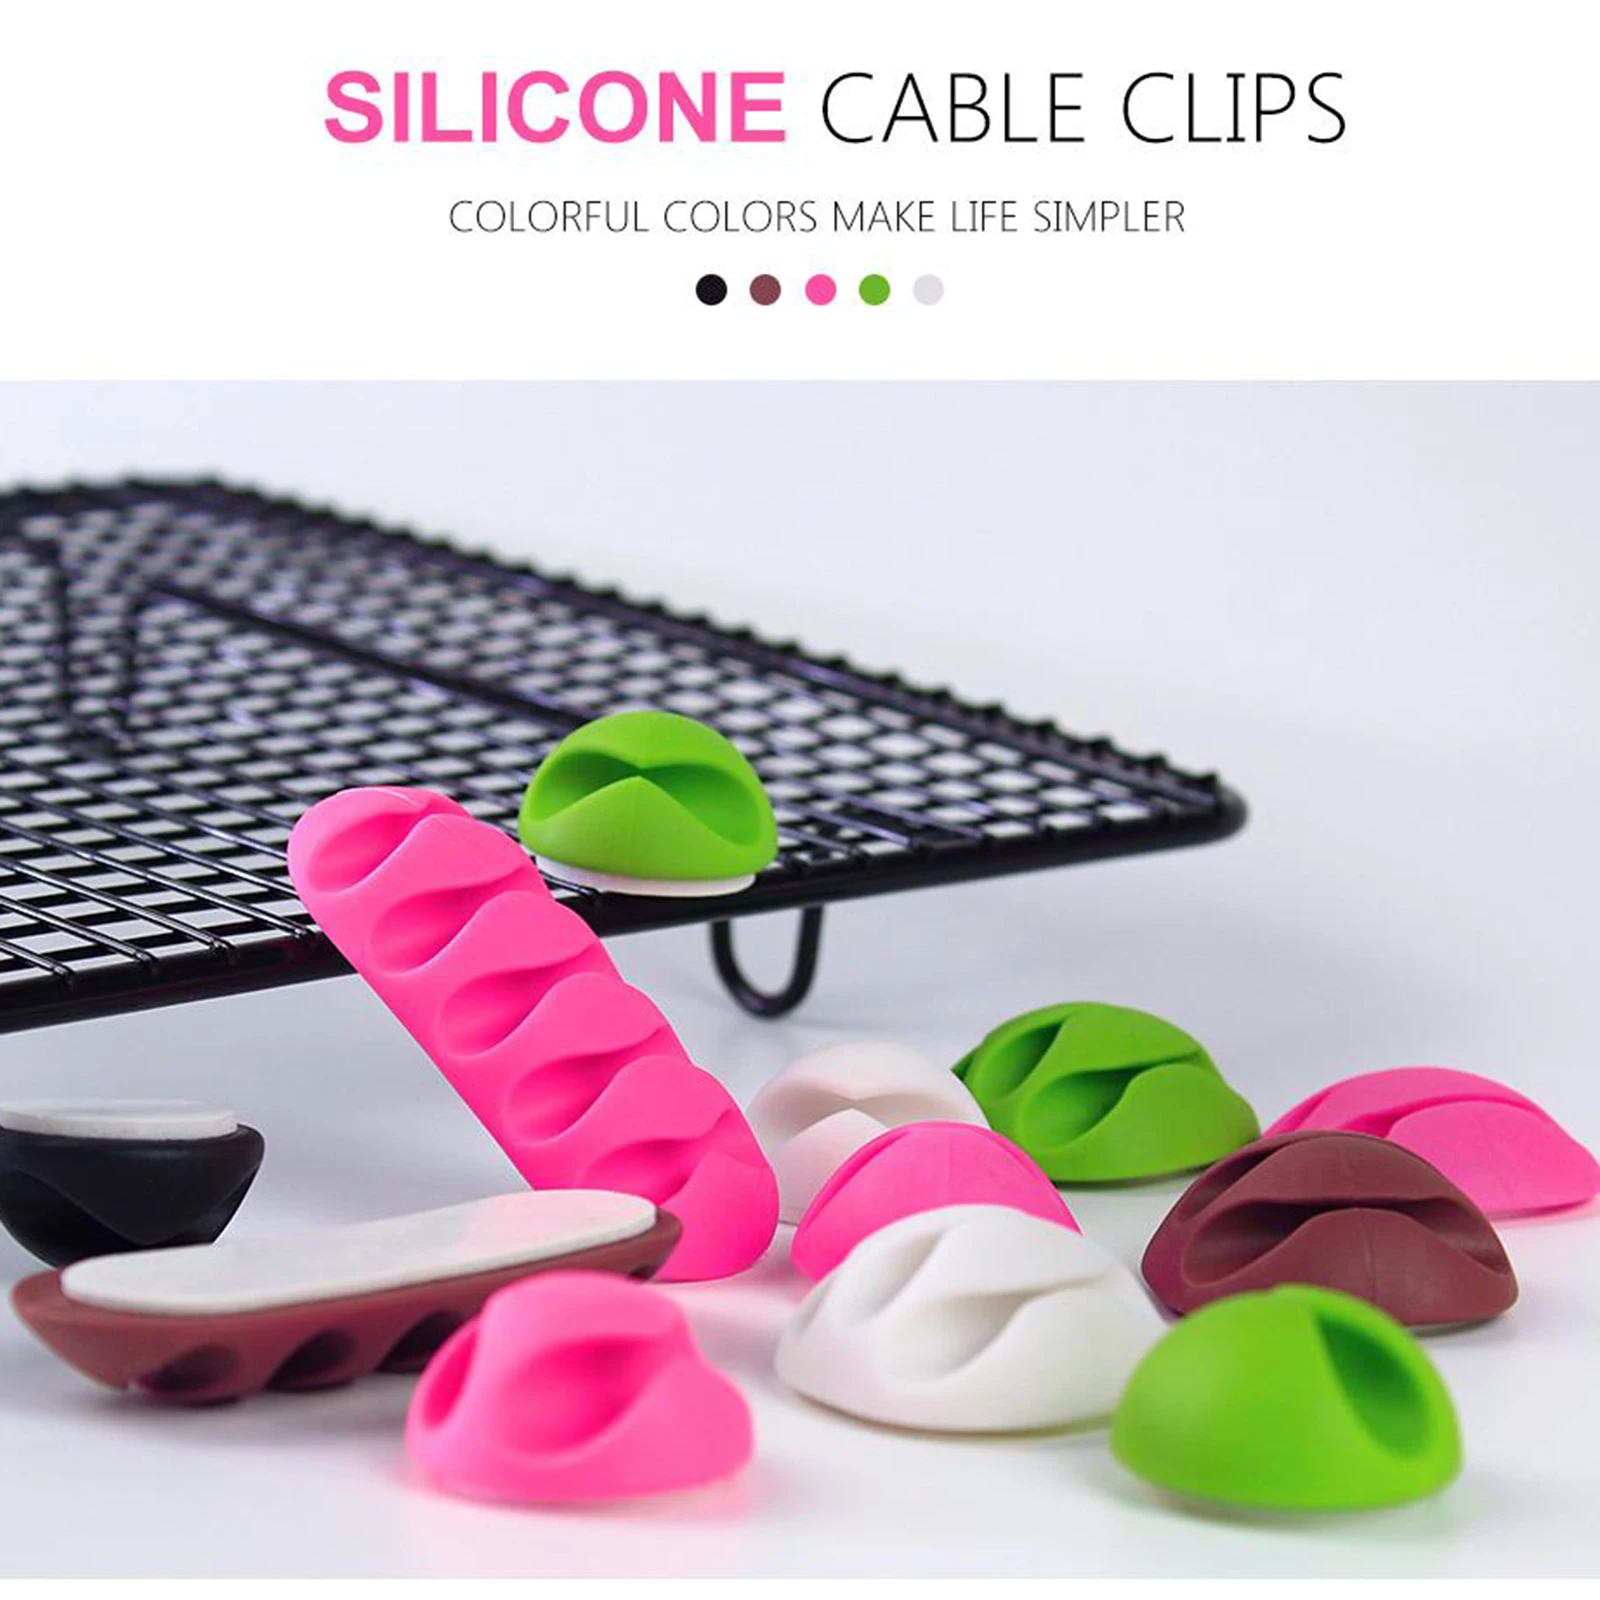 10pcs Cable Clip Desk Desktop Wall Winder Earphone Cord Lead Organizer Wire USB Charger Wire Holder Clips Kit Cord Management